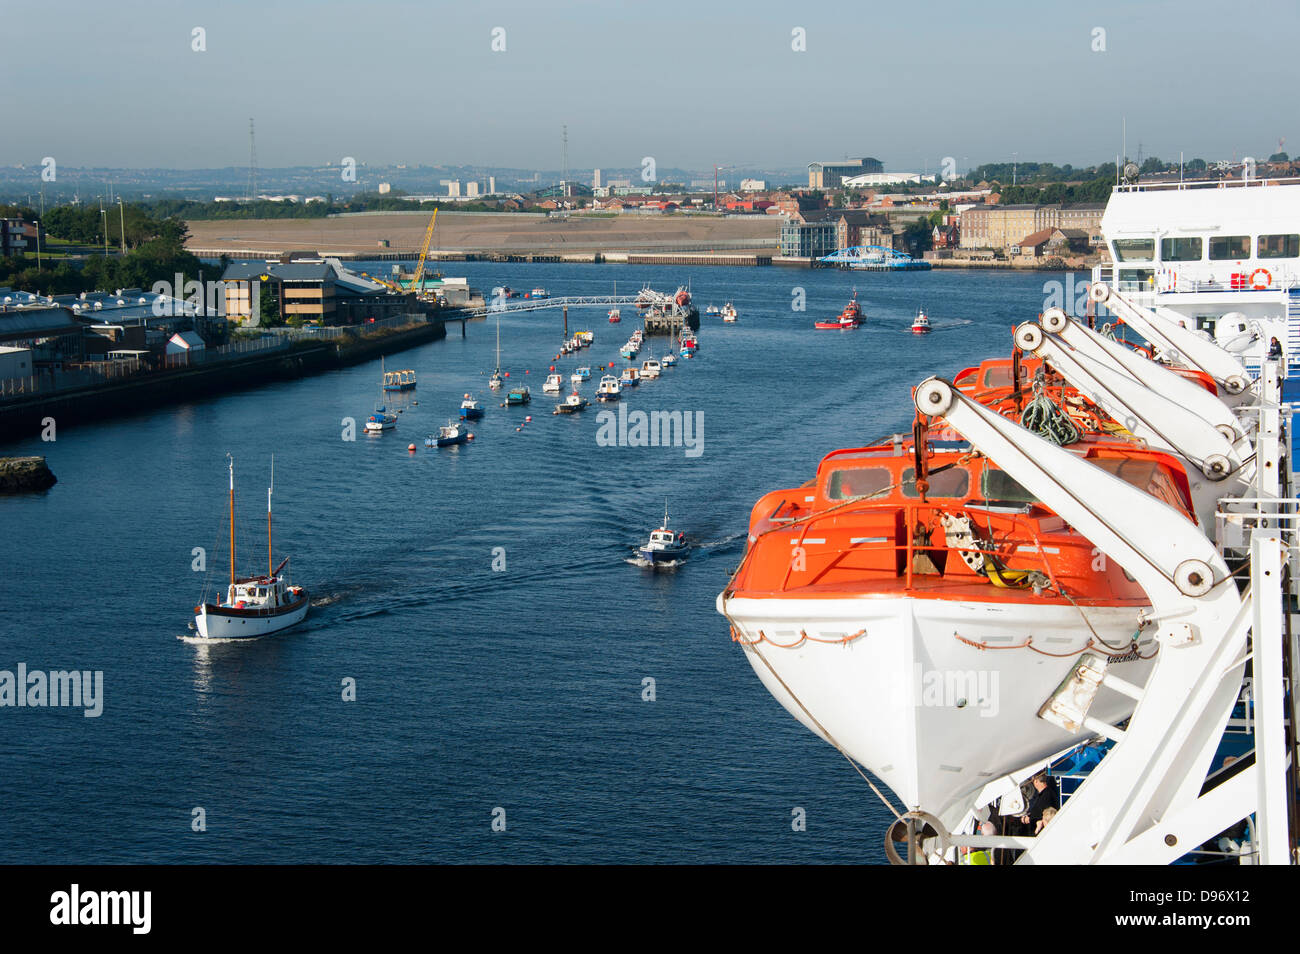 Ferry Boat on river Tyne, South Shields, Newcastle, England, Great Britain, Europe , Faehre auf Fluss Tyne, South Shields, Newca Stock Photo